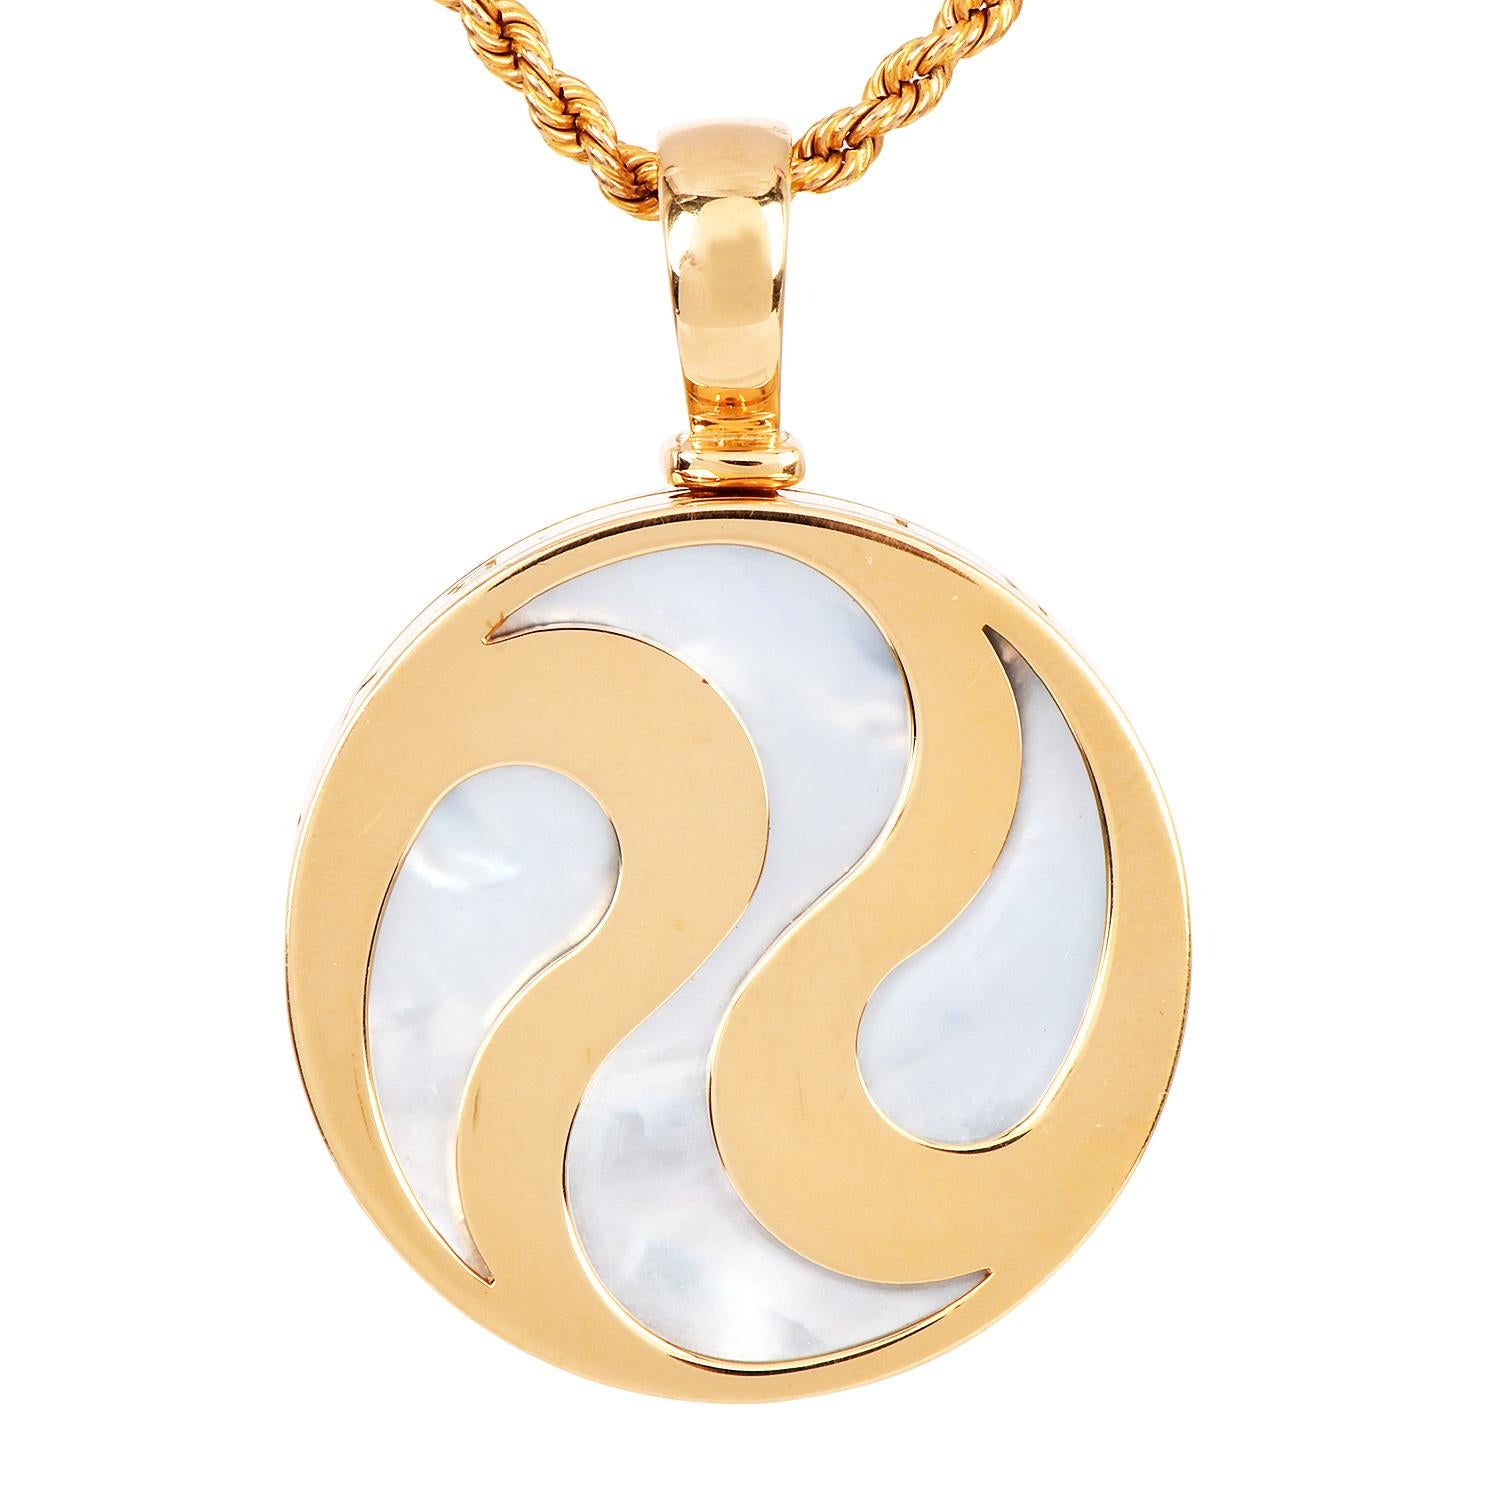 Presenting this mint condition, hardly worn, Bvlgari 18k yellow gold spinning pendant created with a mother of pearl disc. Made by Bulgari in the 1980s from Italy with all the hallmarks. This Bvlgari gold pendant is in excellent condition and it